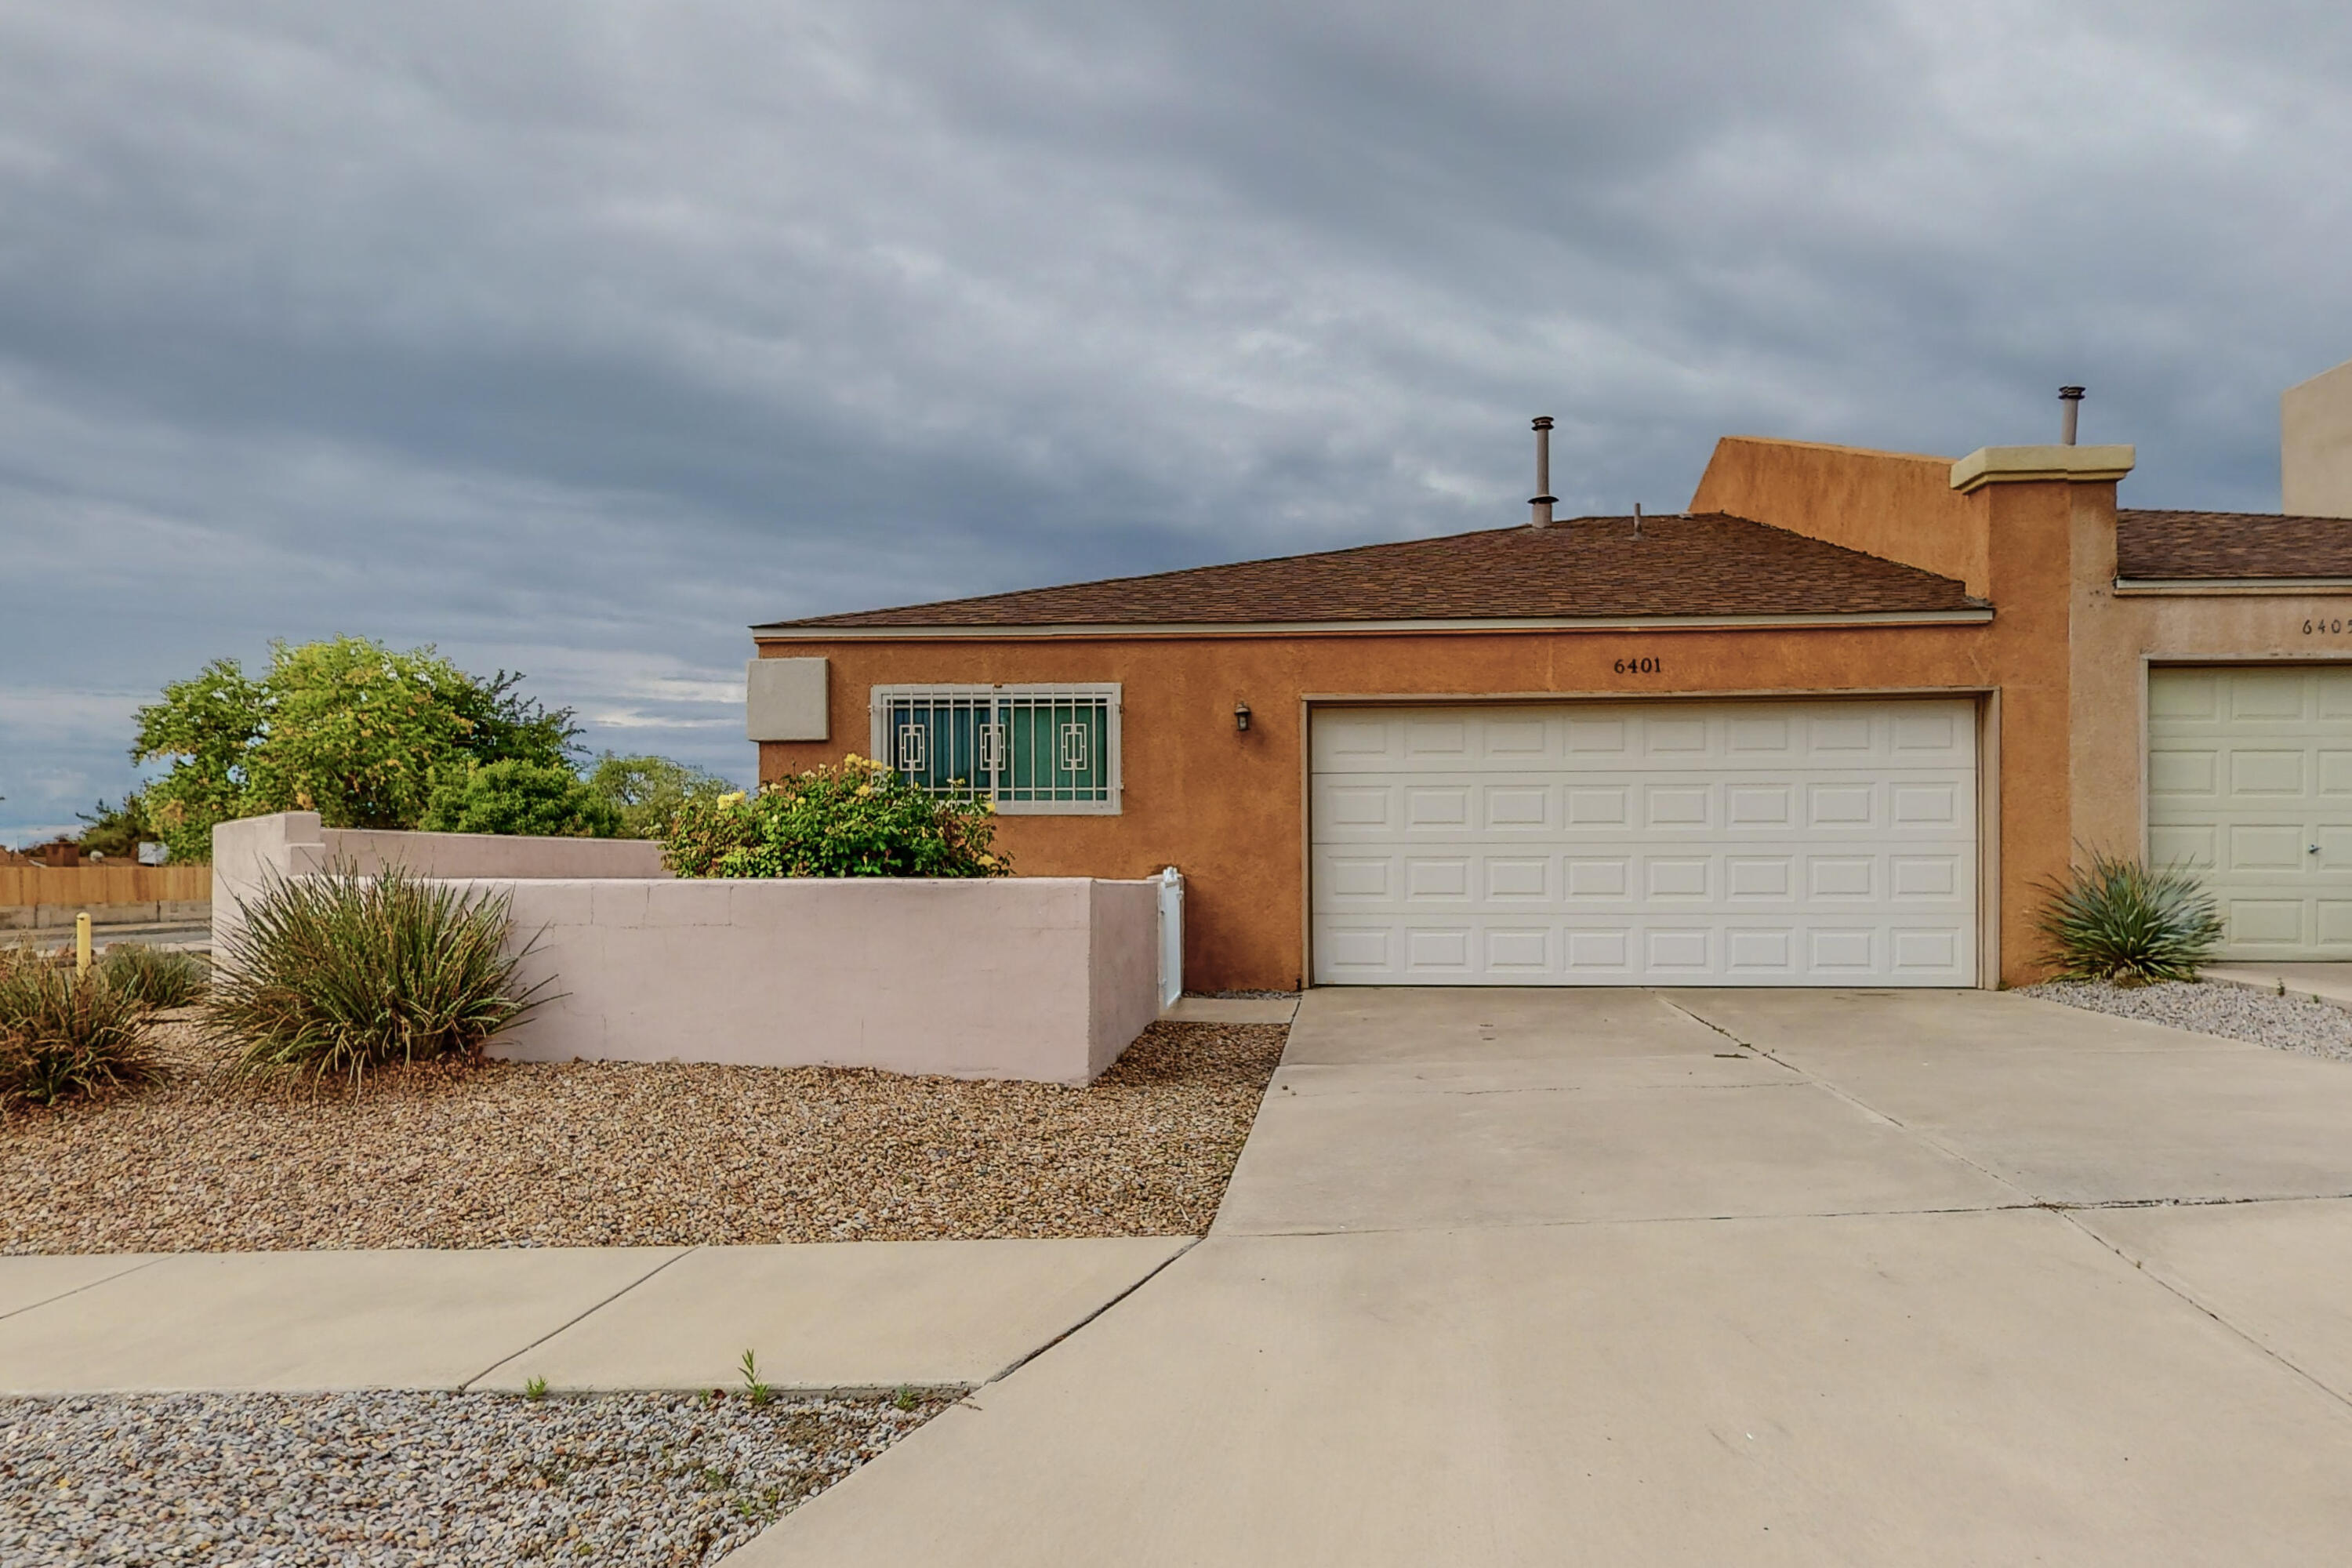 Spacious 2 Bedroom with 2 full Bathrooms Town Home in great NE Albuquerque location. No HOA. This Town Home is situated on a large Corner Lot and offers a nice Floorplan, large Primary Bedroom with double sinks in Bathroom and walk-in Closet. All appliances included!